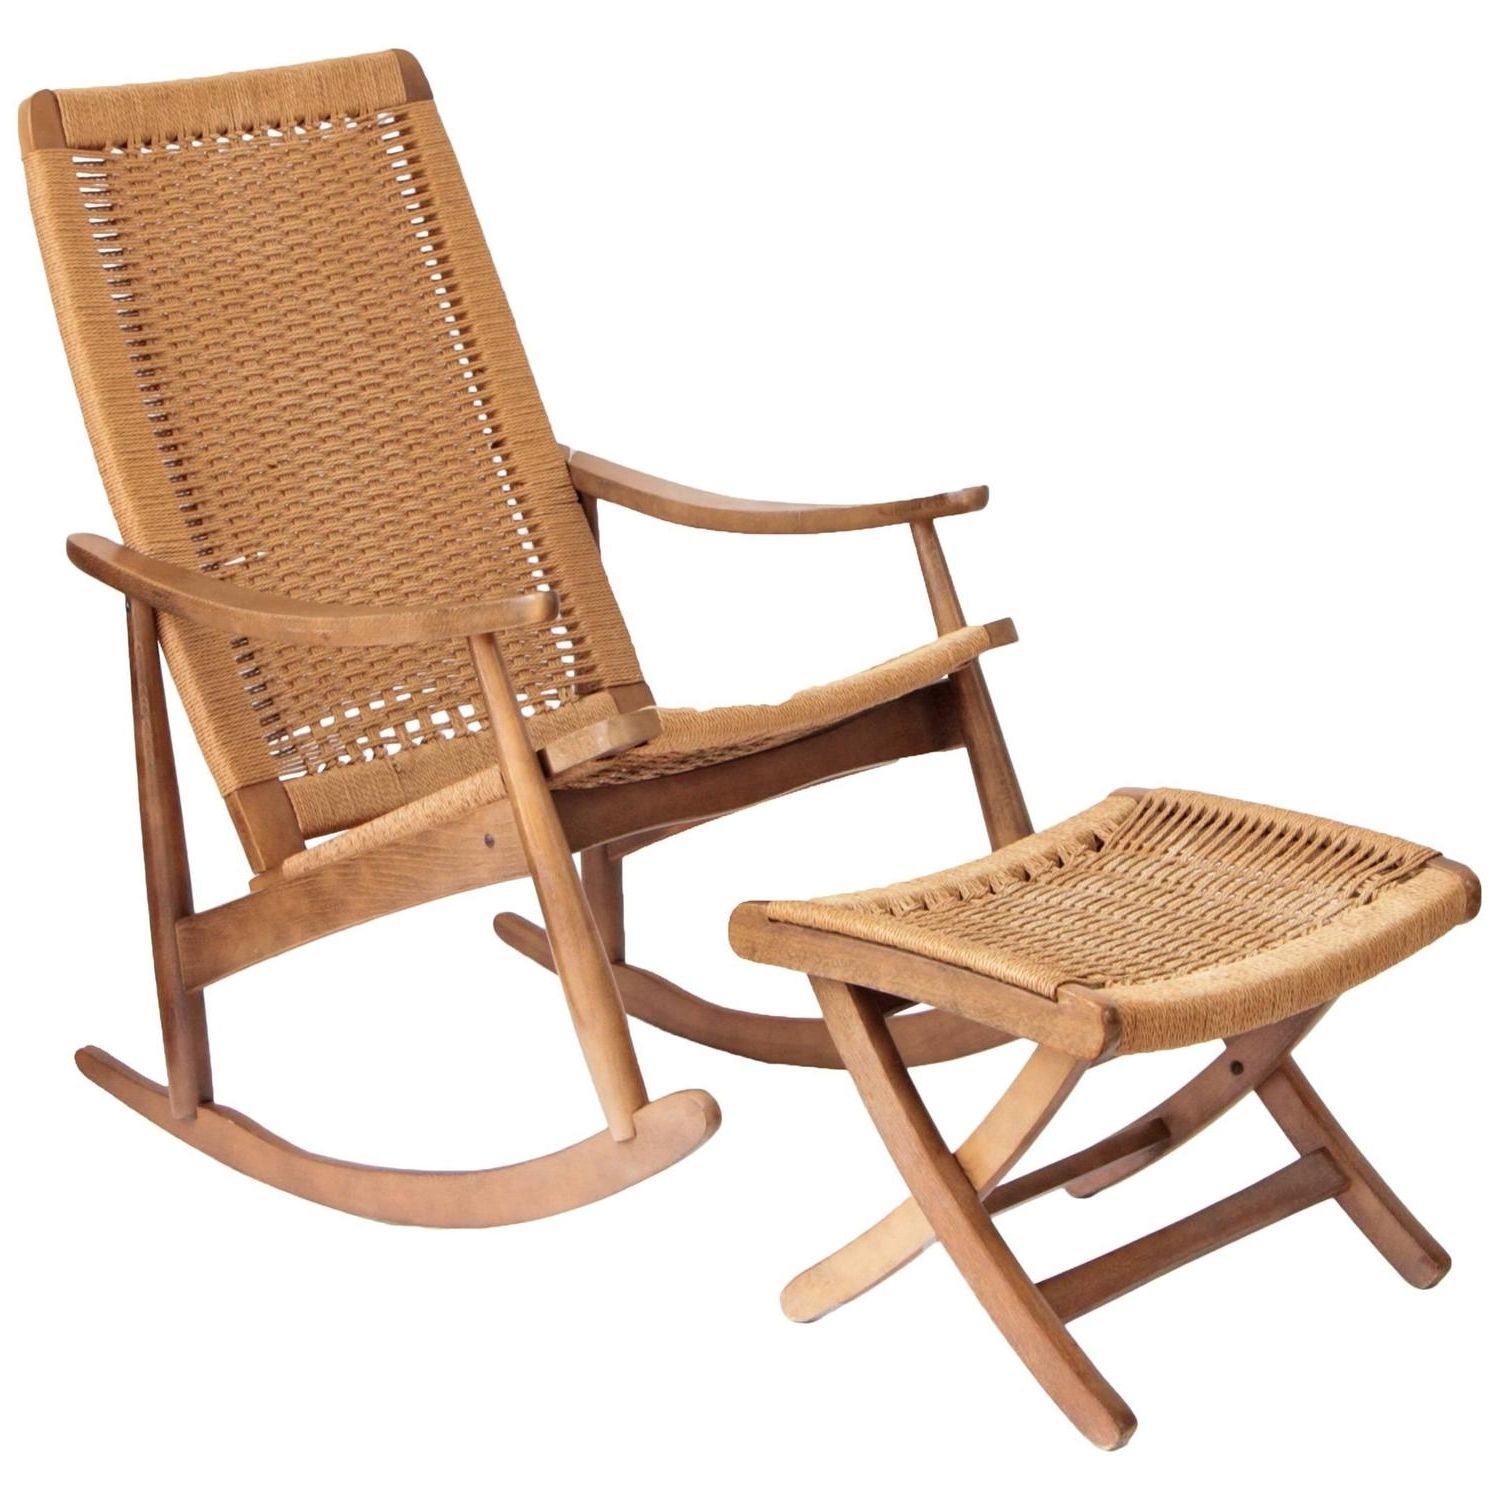 2018 Patio Rocking Chairs With Ottoman Within Woven Rope Mid Century Modern Rocking Chair And Ottoman At 1stdibs (View 1 of 20)